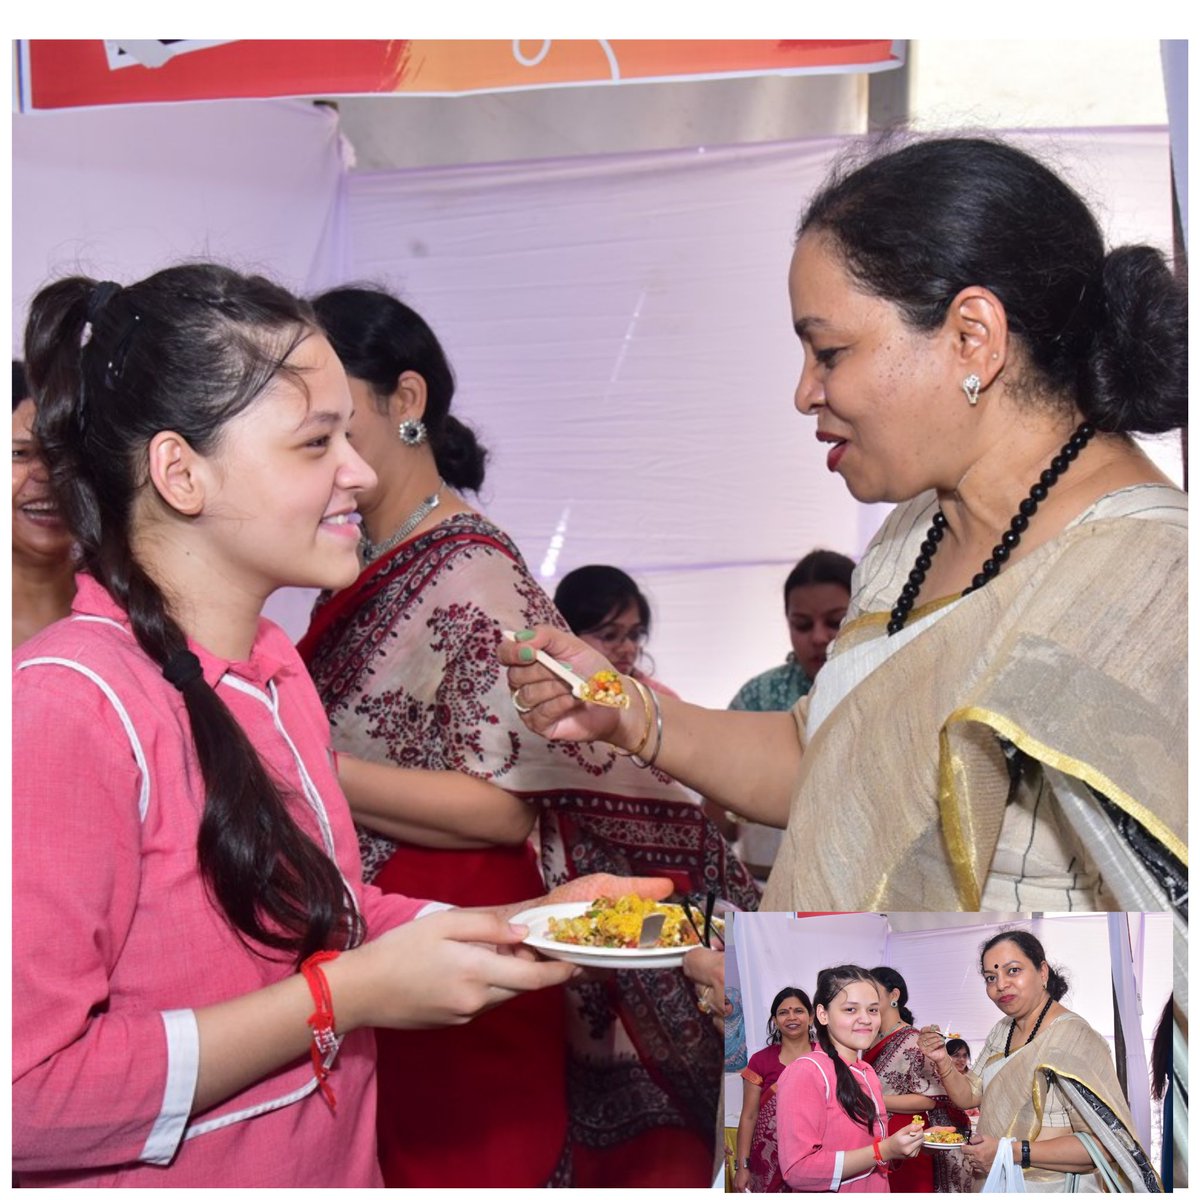 Attended  #SuperfoodMillet festival at Sir Ganga Ram Hospital on the occasion of #NationalNutritionWeek . Mouthwatering food stalls ,live cooking, Nukkad Natak etc enthralled us ! Thank you @KavitaNarayana6 for showcasing healthy & wholesome recipes at your stall !